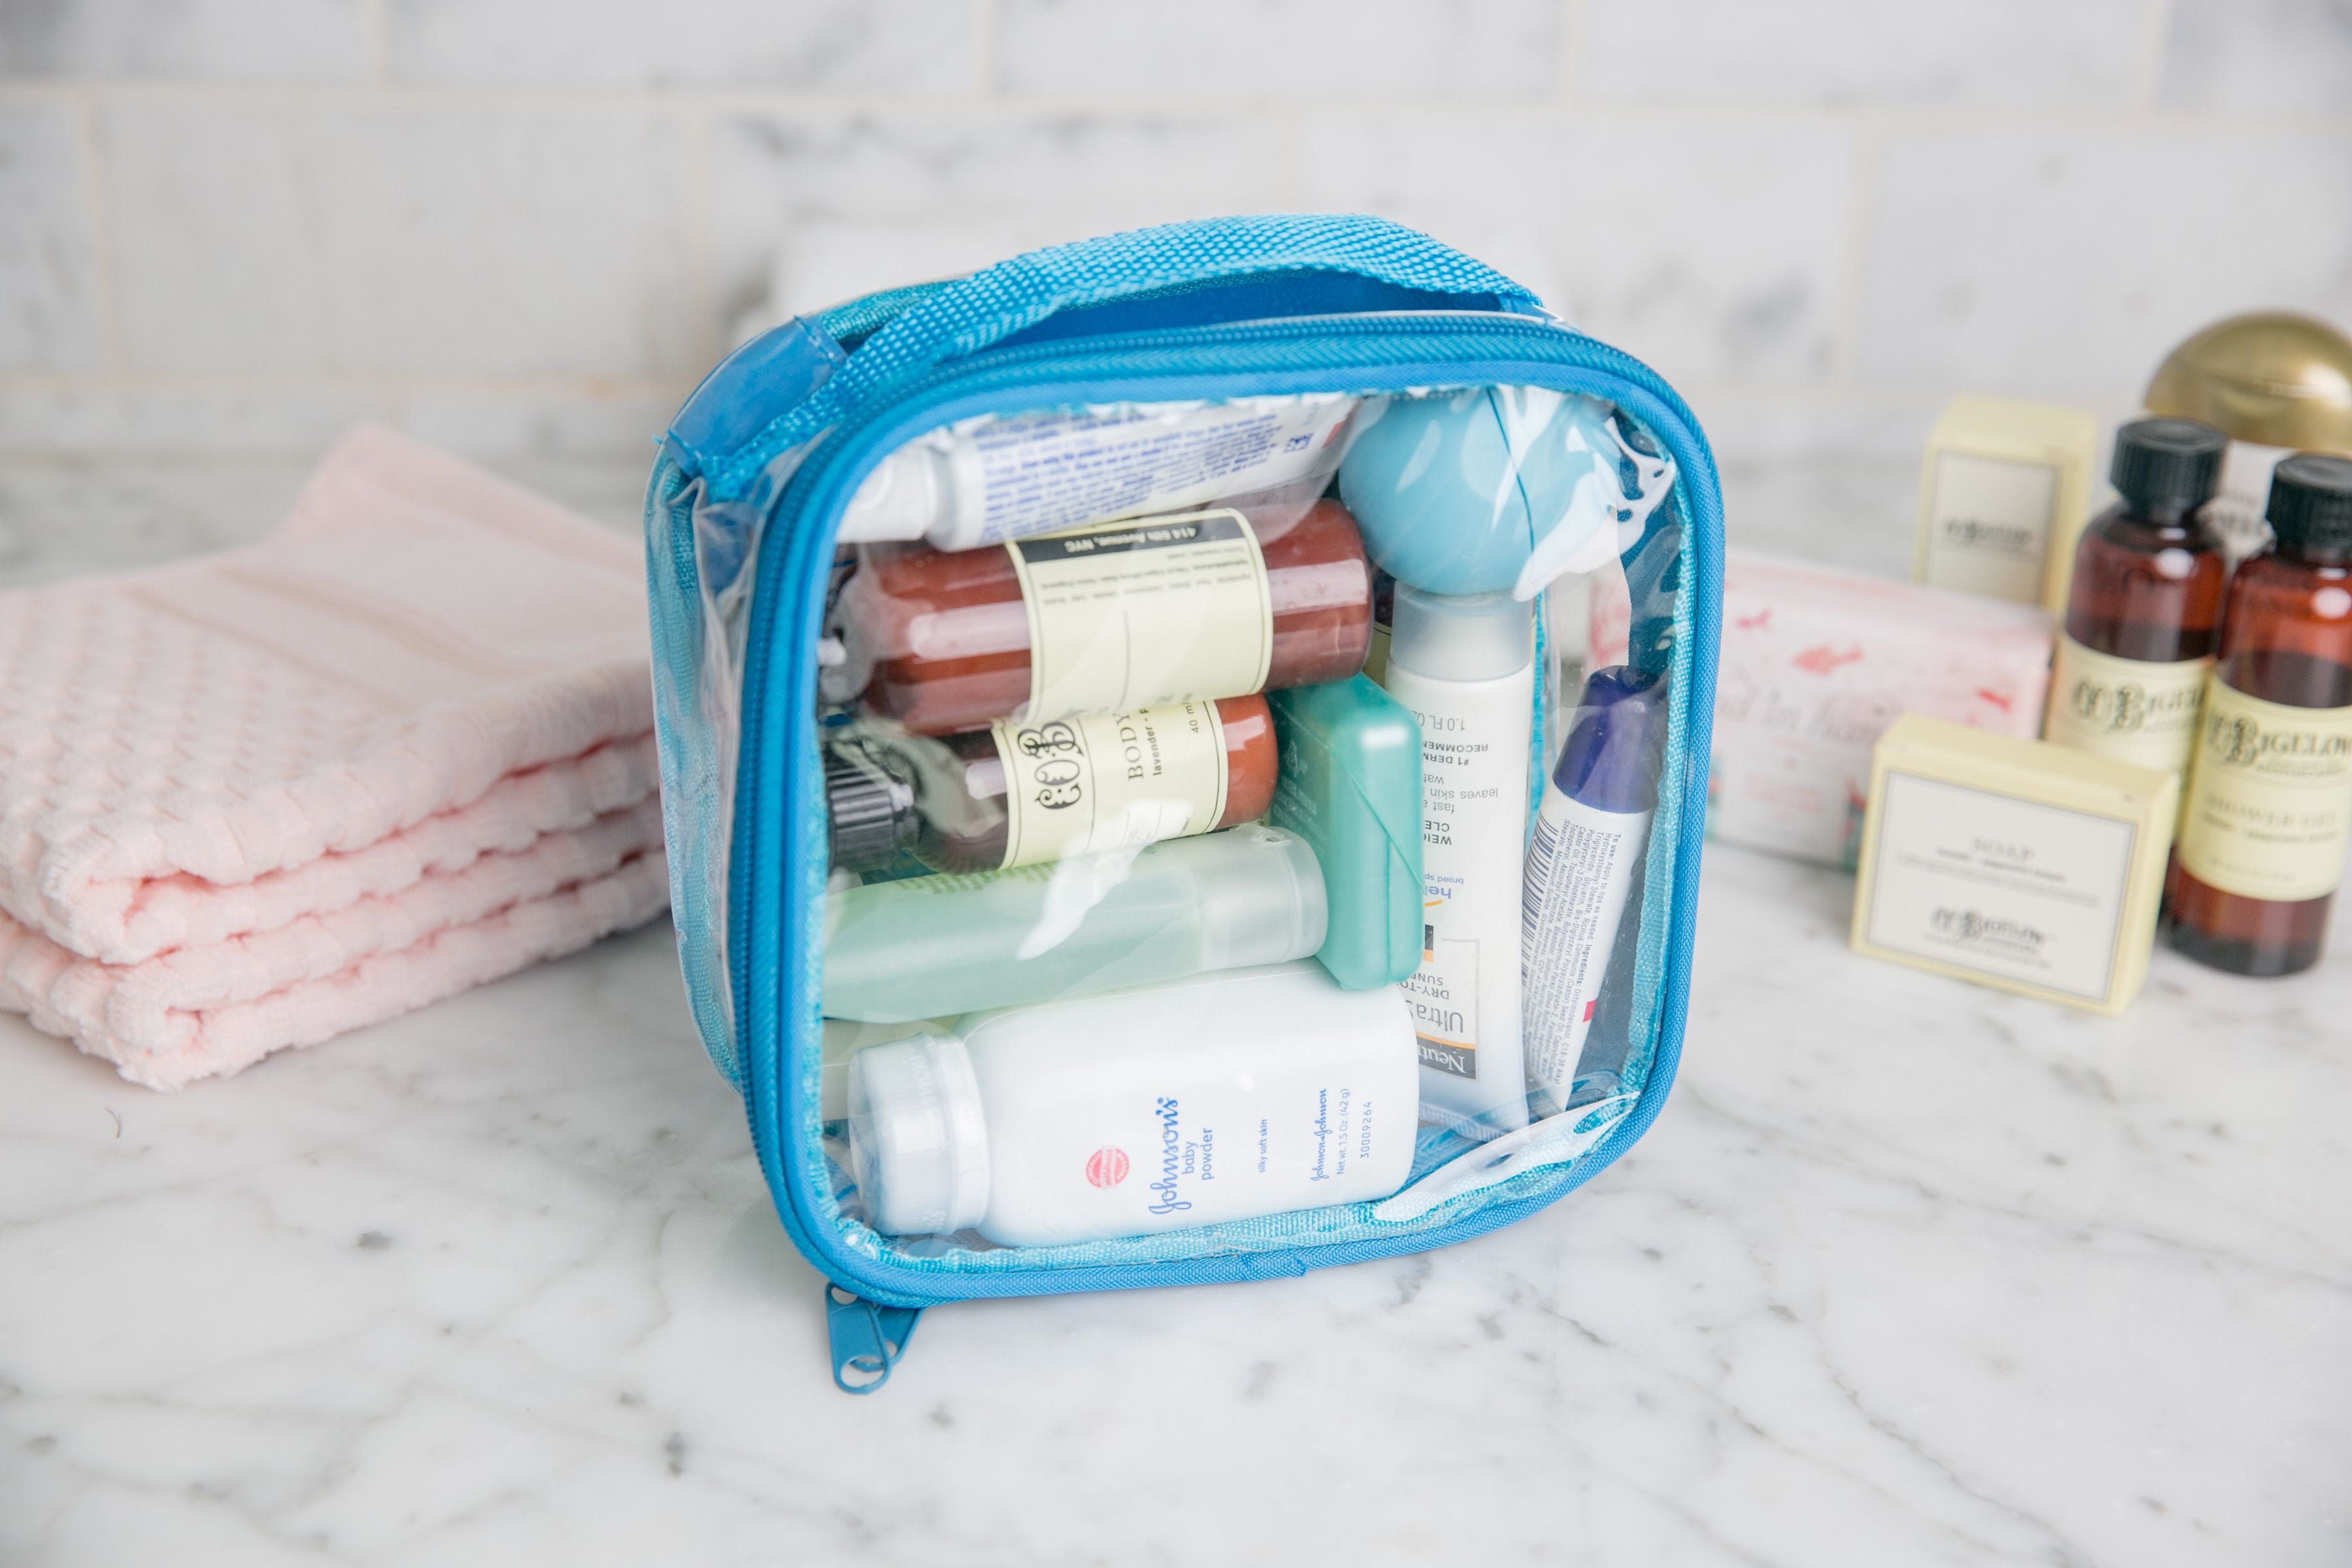 Toiletry for a weekend trip in an extra small packing cube